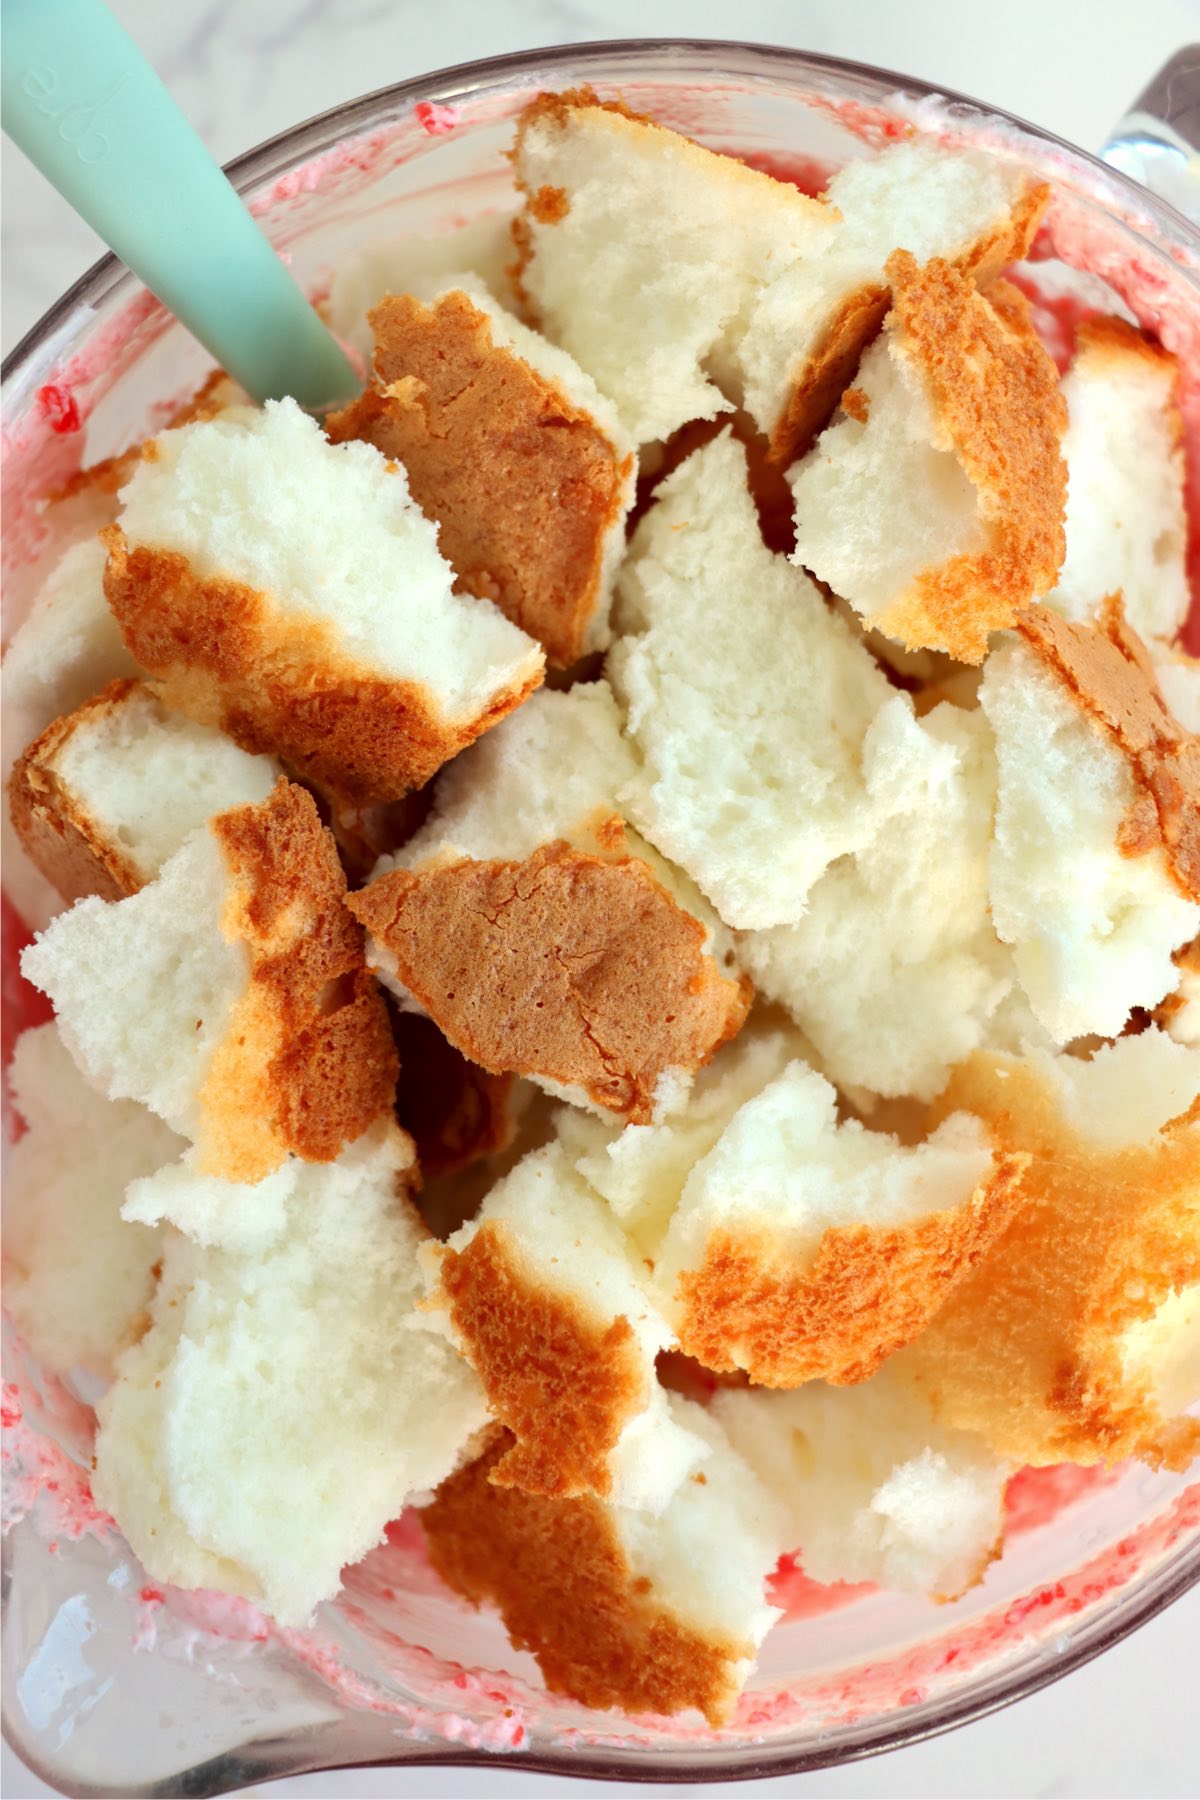 Chunks of angel food cake in a bowl